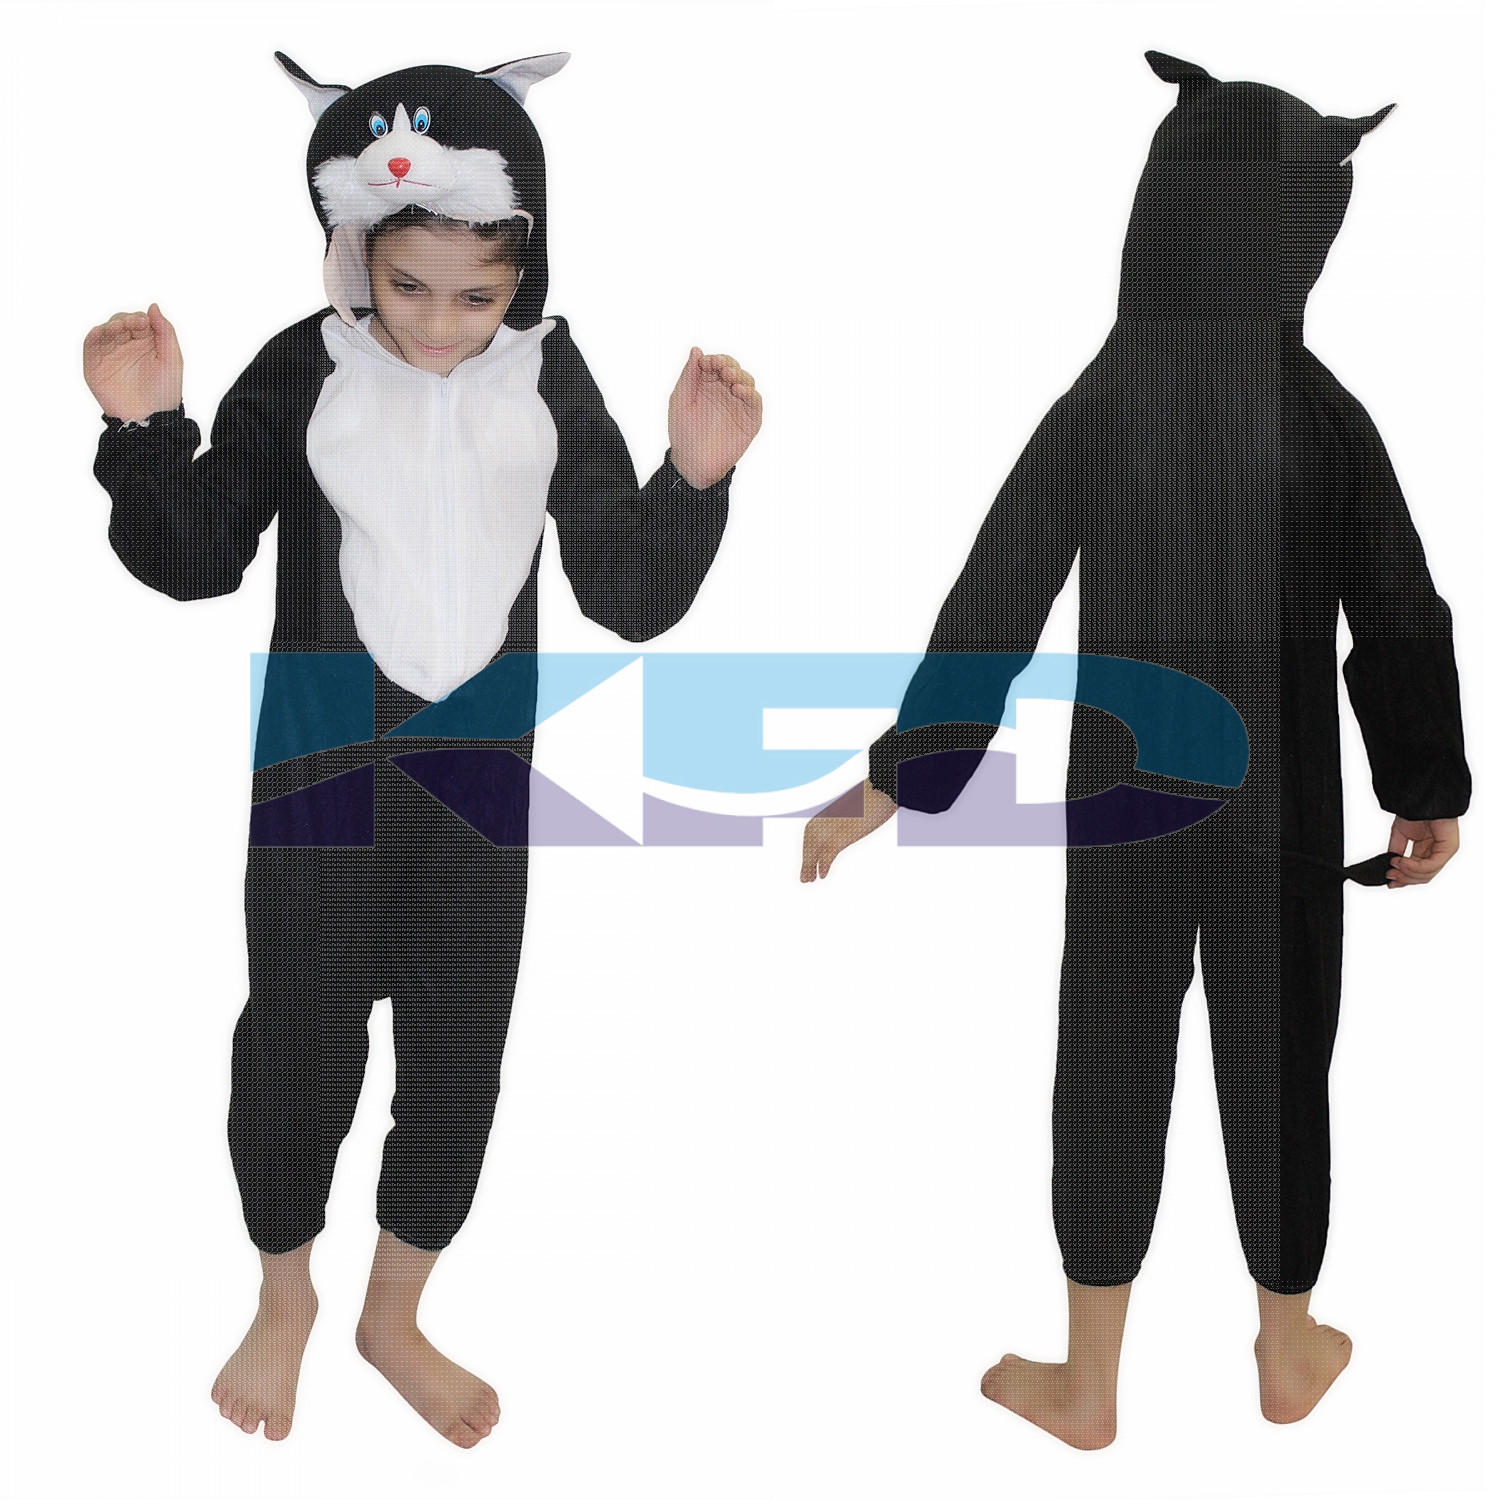 Cat fancy dress for kids,Pet Animal Costume for School Annual function/Theme Party/Competition/Stage Shows Dress